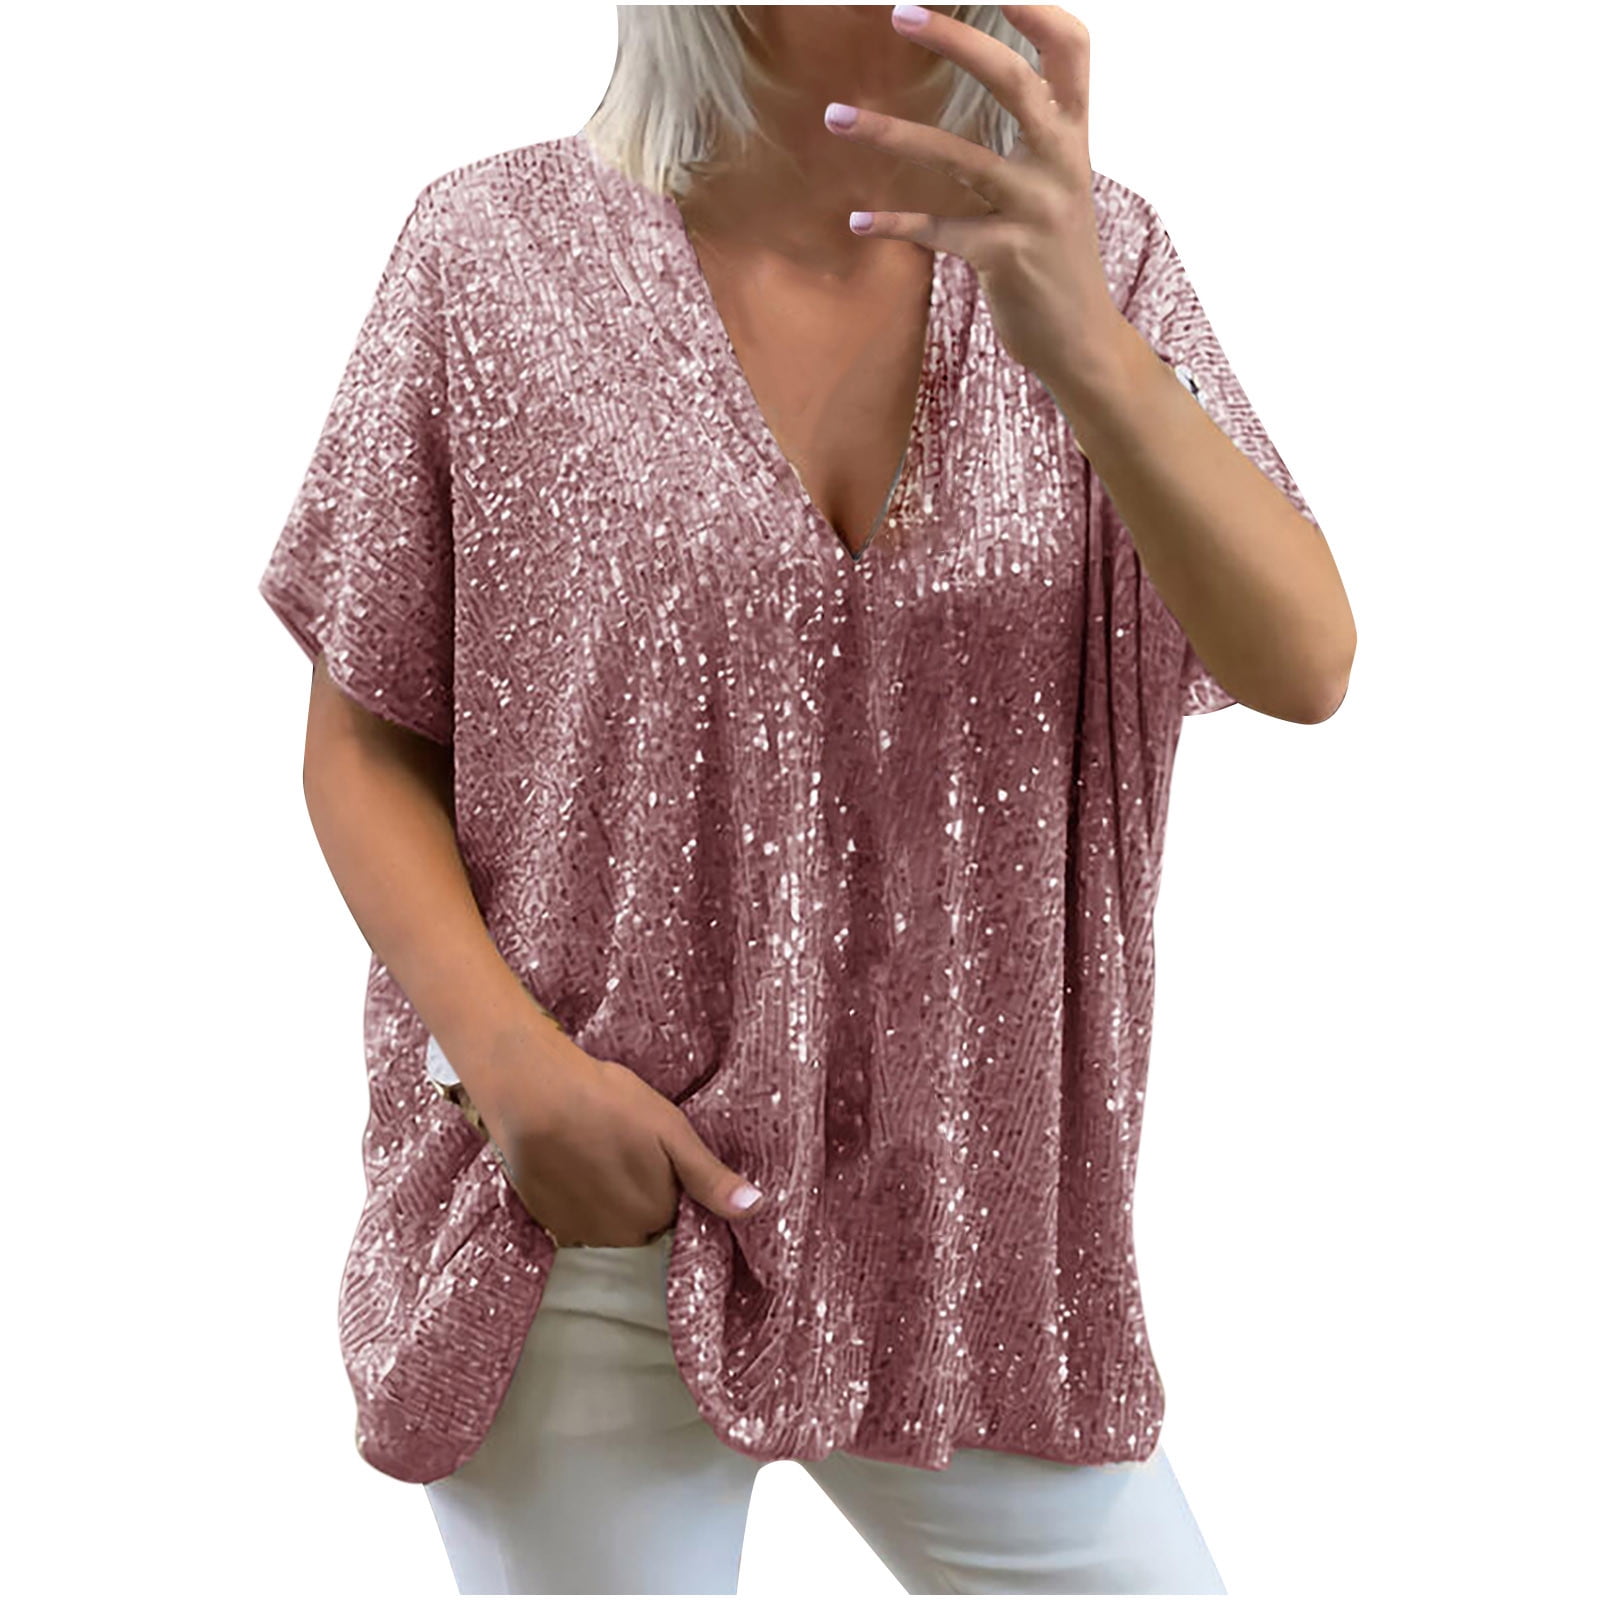  Women's Tunics - XXL / Women's Tunics / Women's Tops, Tees &  Blouses: Clothing, Shoes & Jewelry